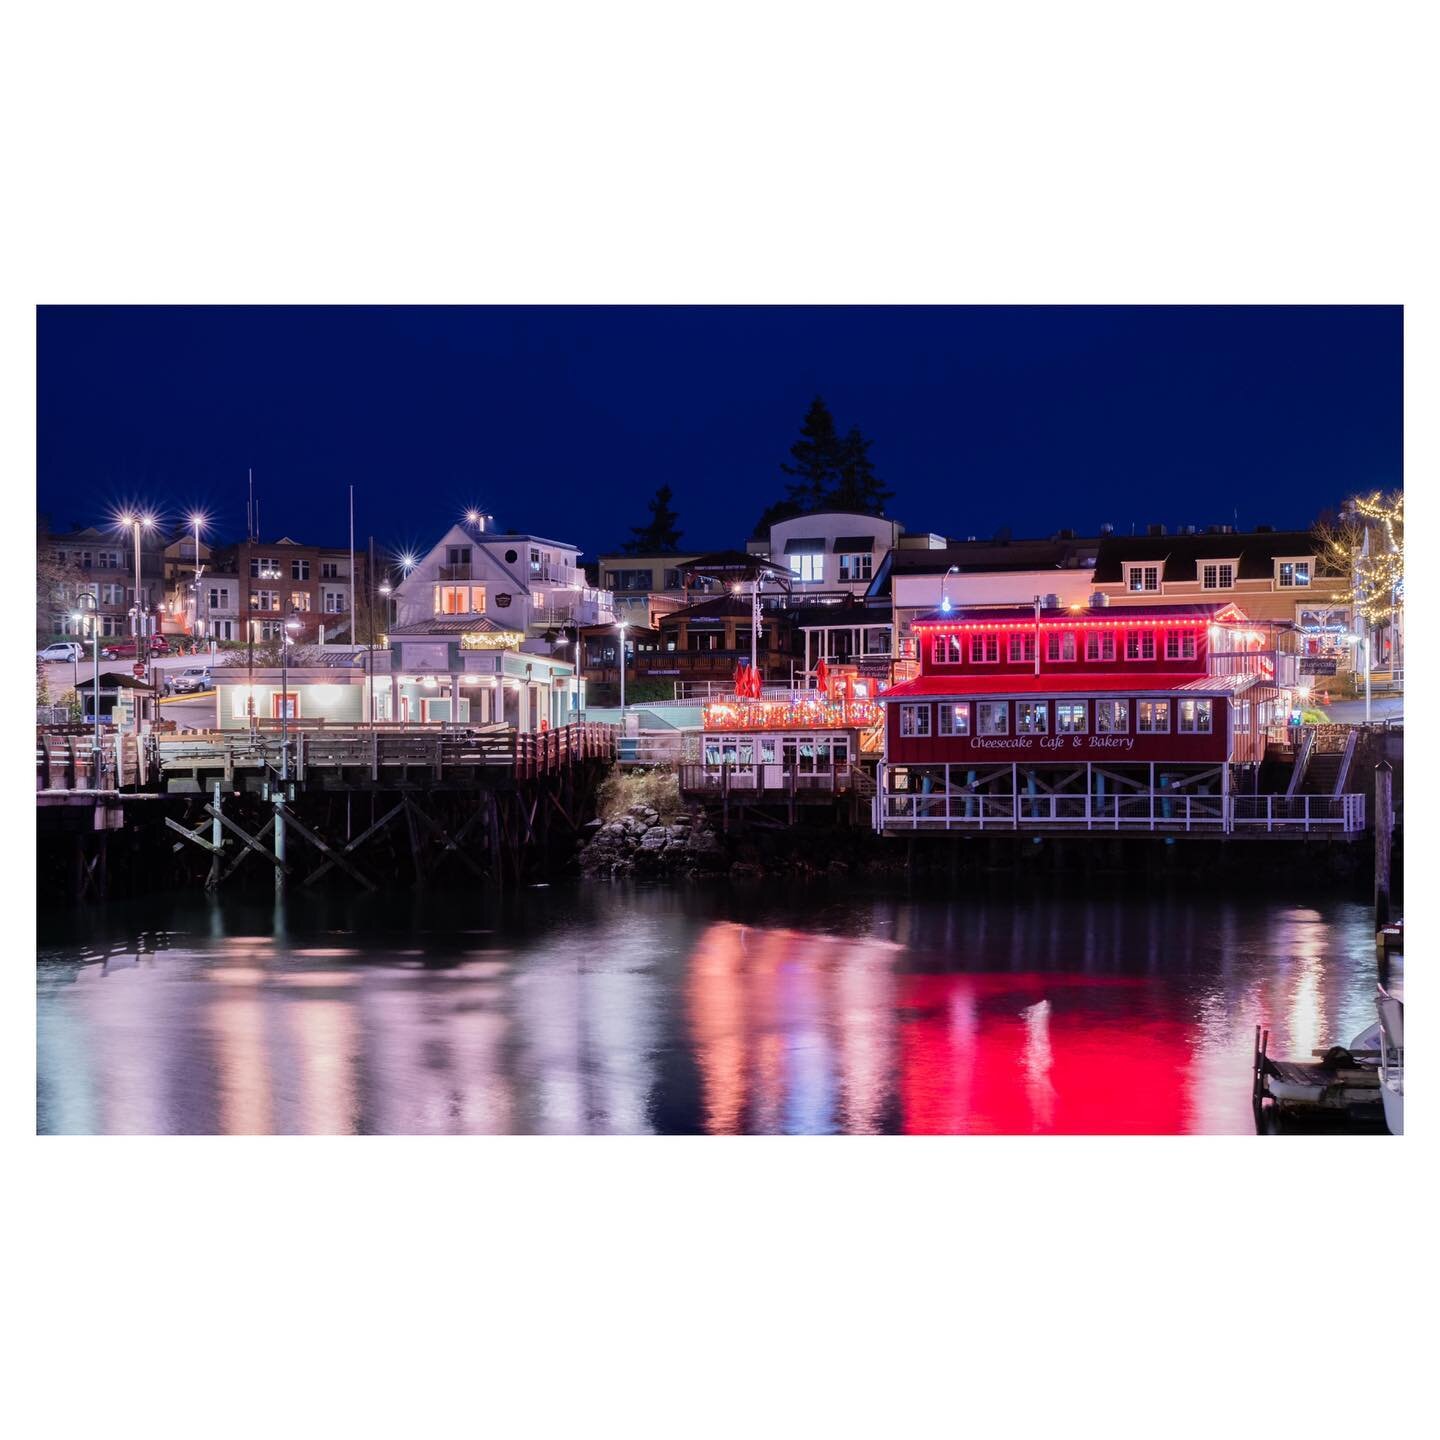 friday harbor on a vibrant winter&rsquo;s night
&bull;
&bull;
&bull;
&bull;
#sonyalpha #sonya #sony #photography #photooftheday #sonyphotography #portrait #sonyimages #emount #photographer #bealpha #travel #photo #picoftheday #portraits #rii #sonypho